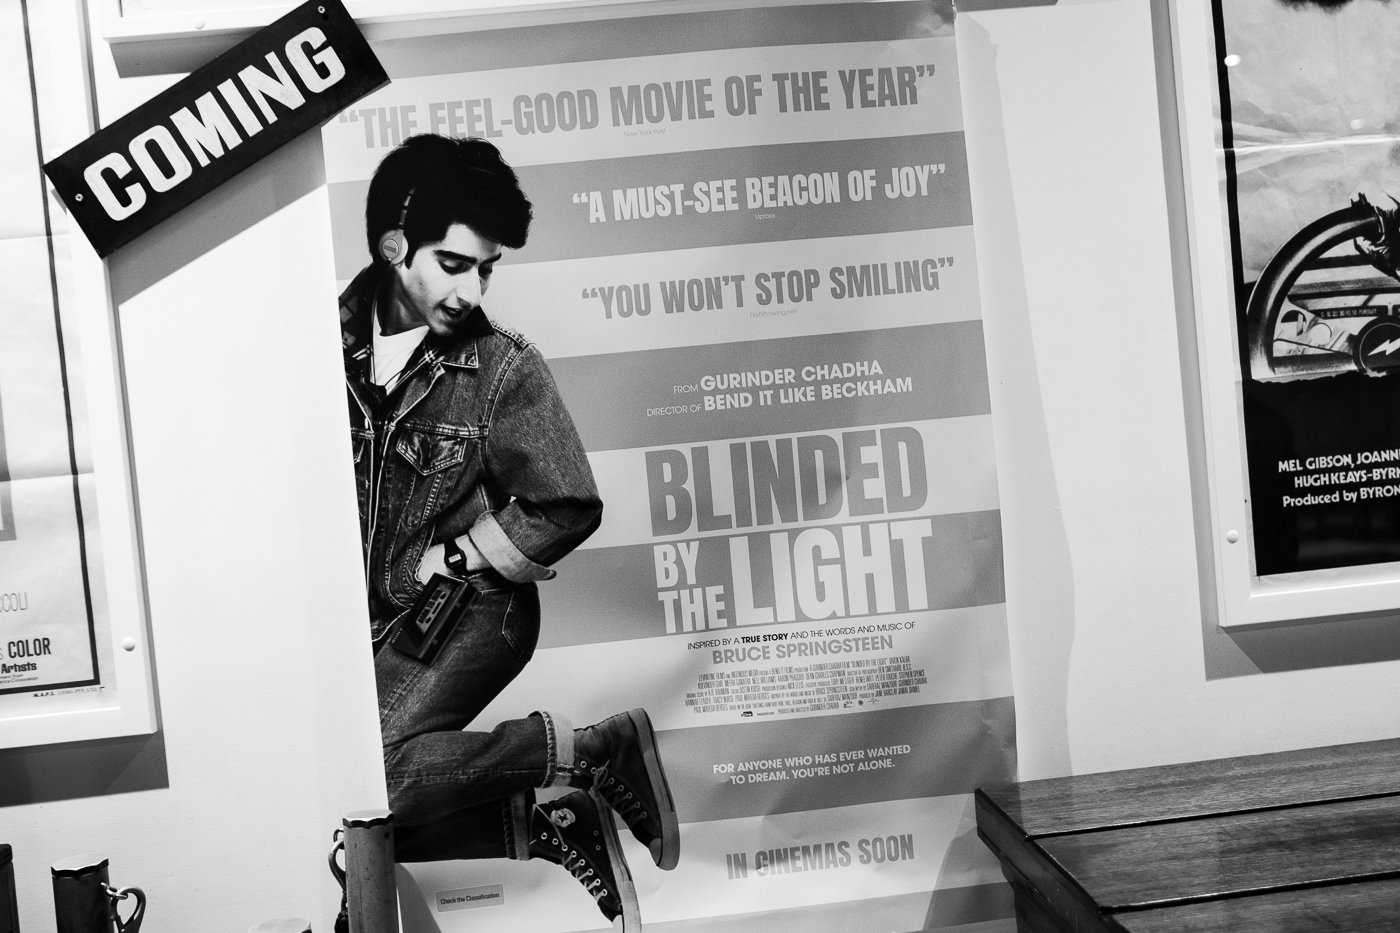 TWE&#8217;s screening of Blinded by the Light